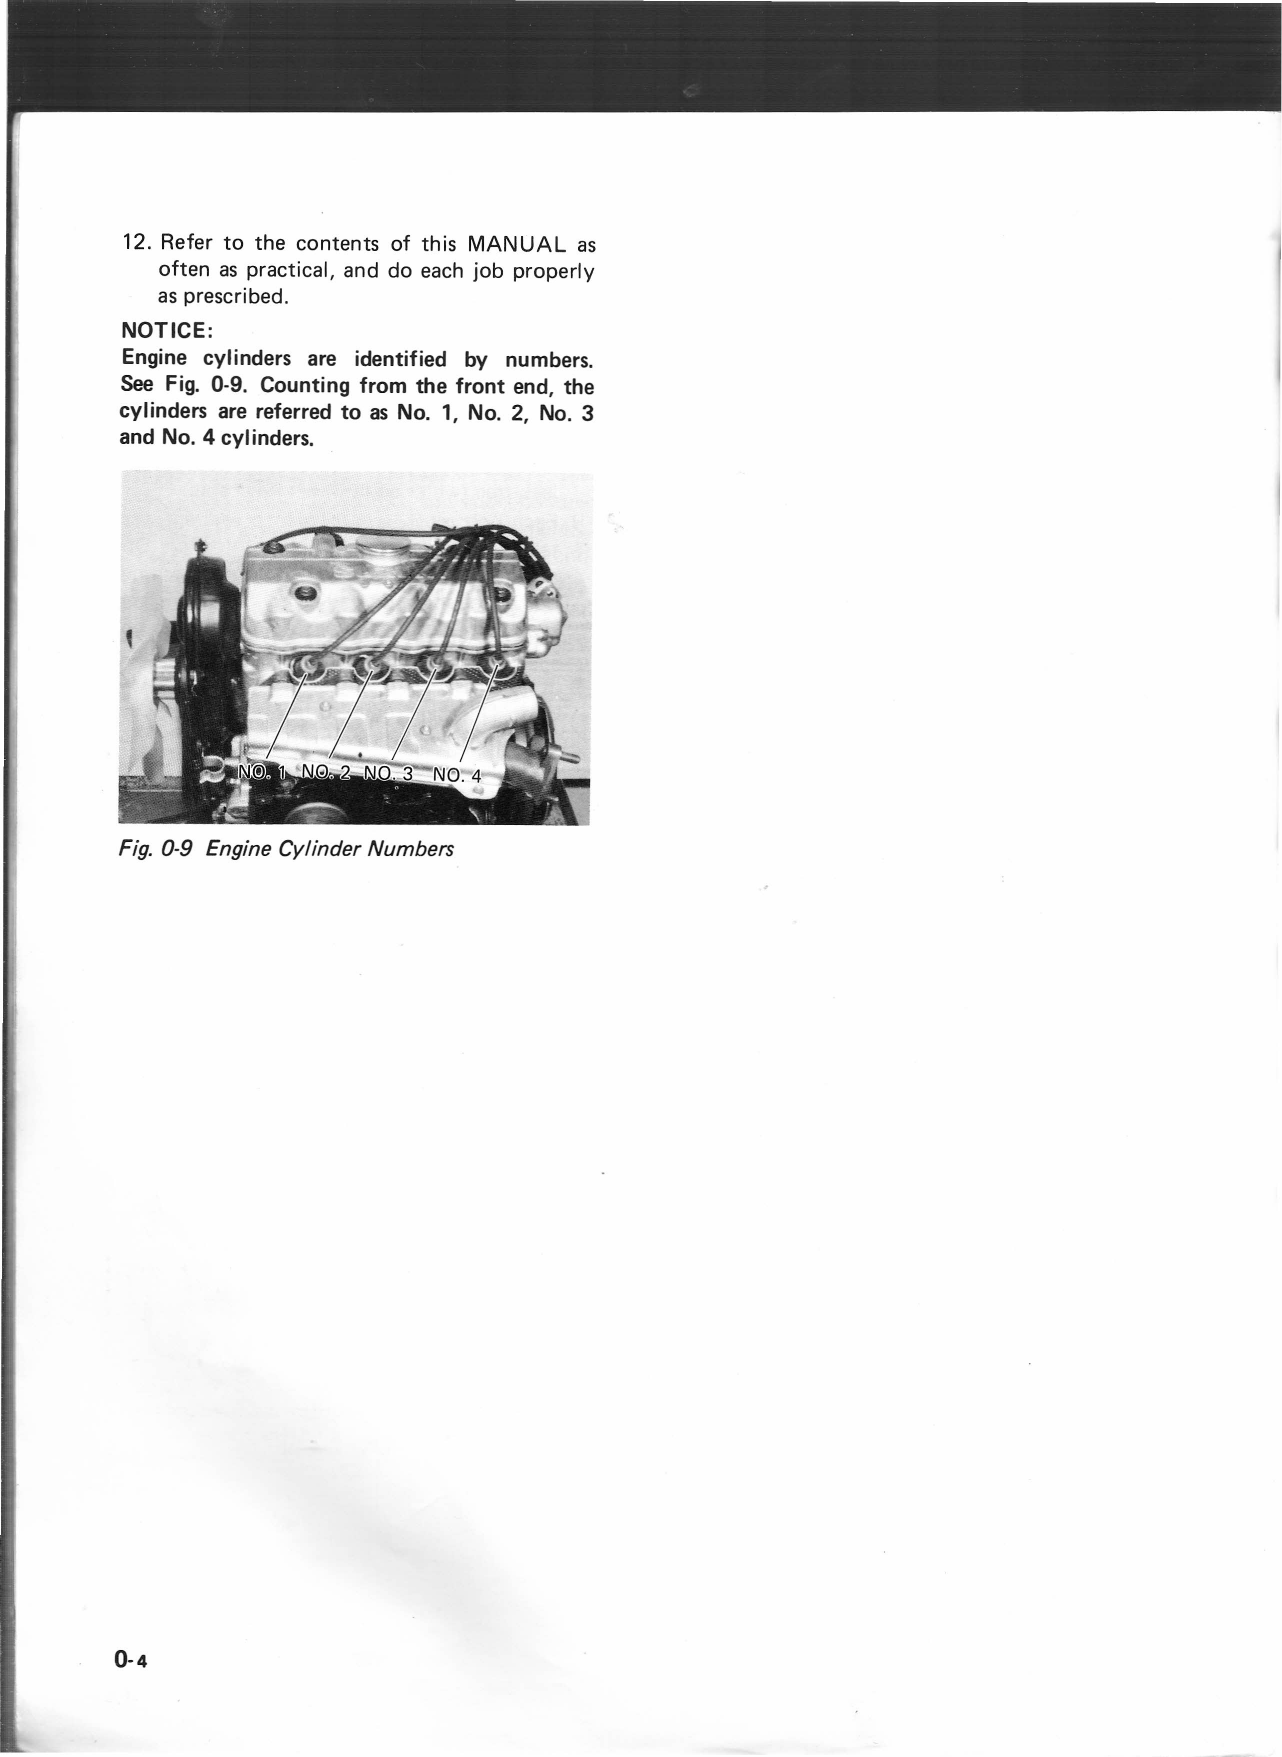 1985-1991 Suzuki Carry manual Preview image 5